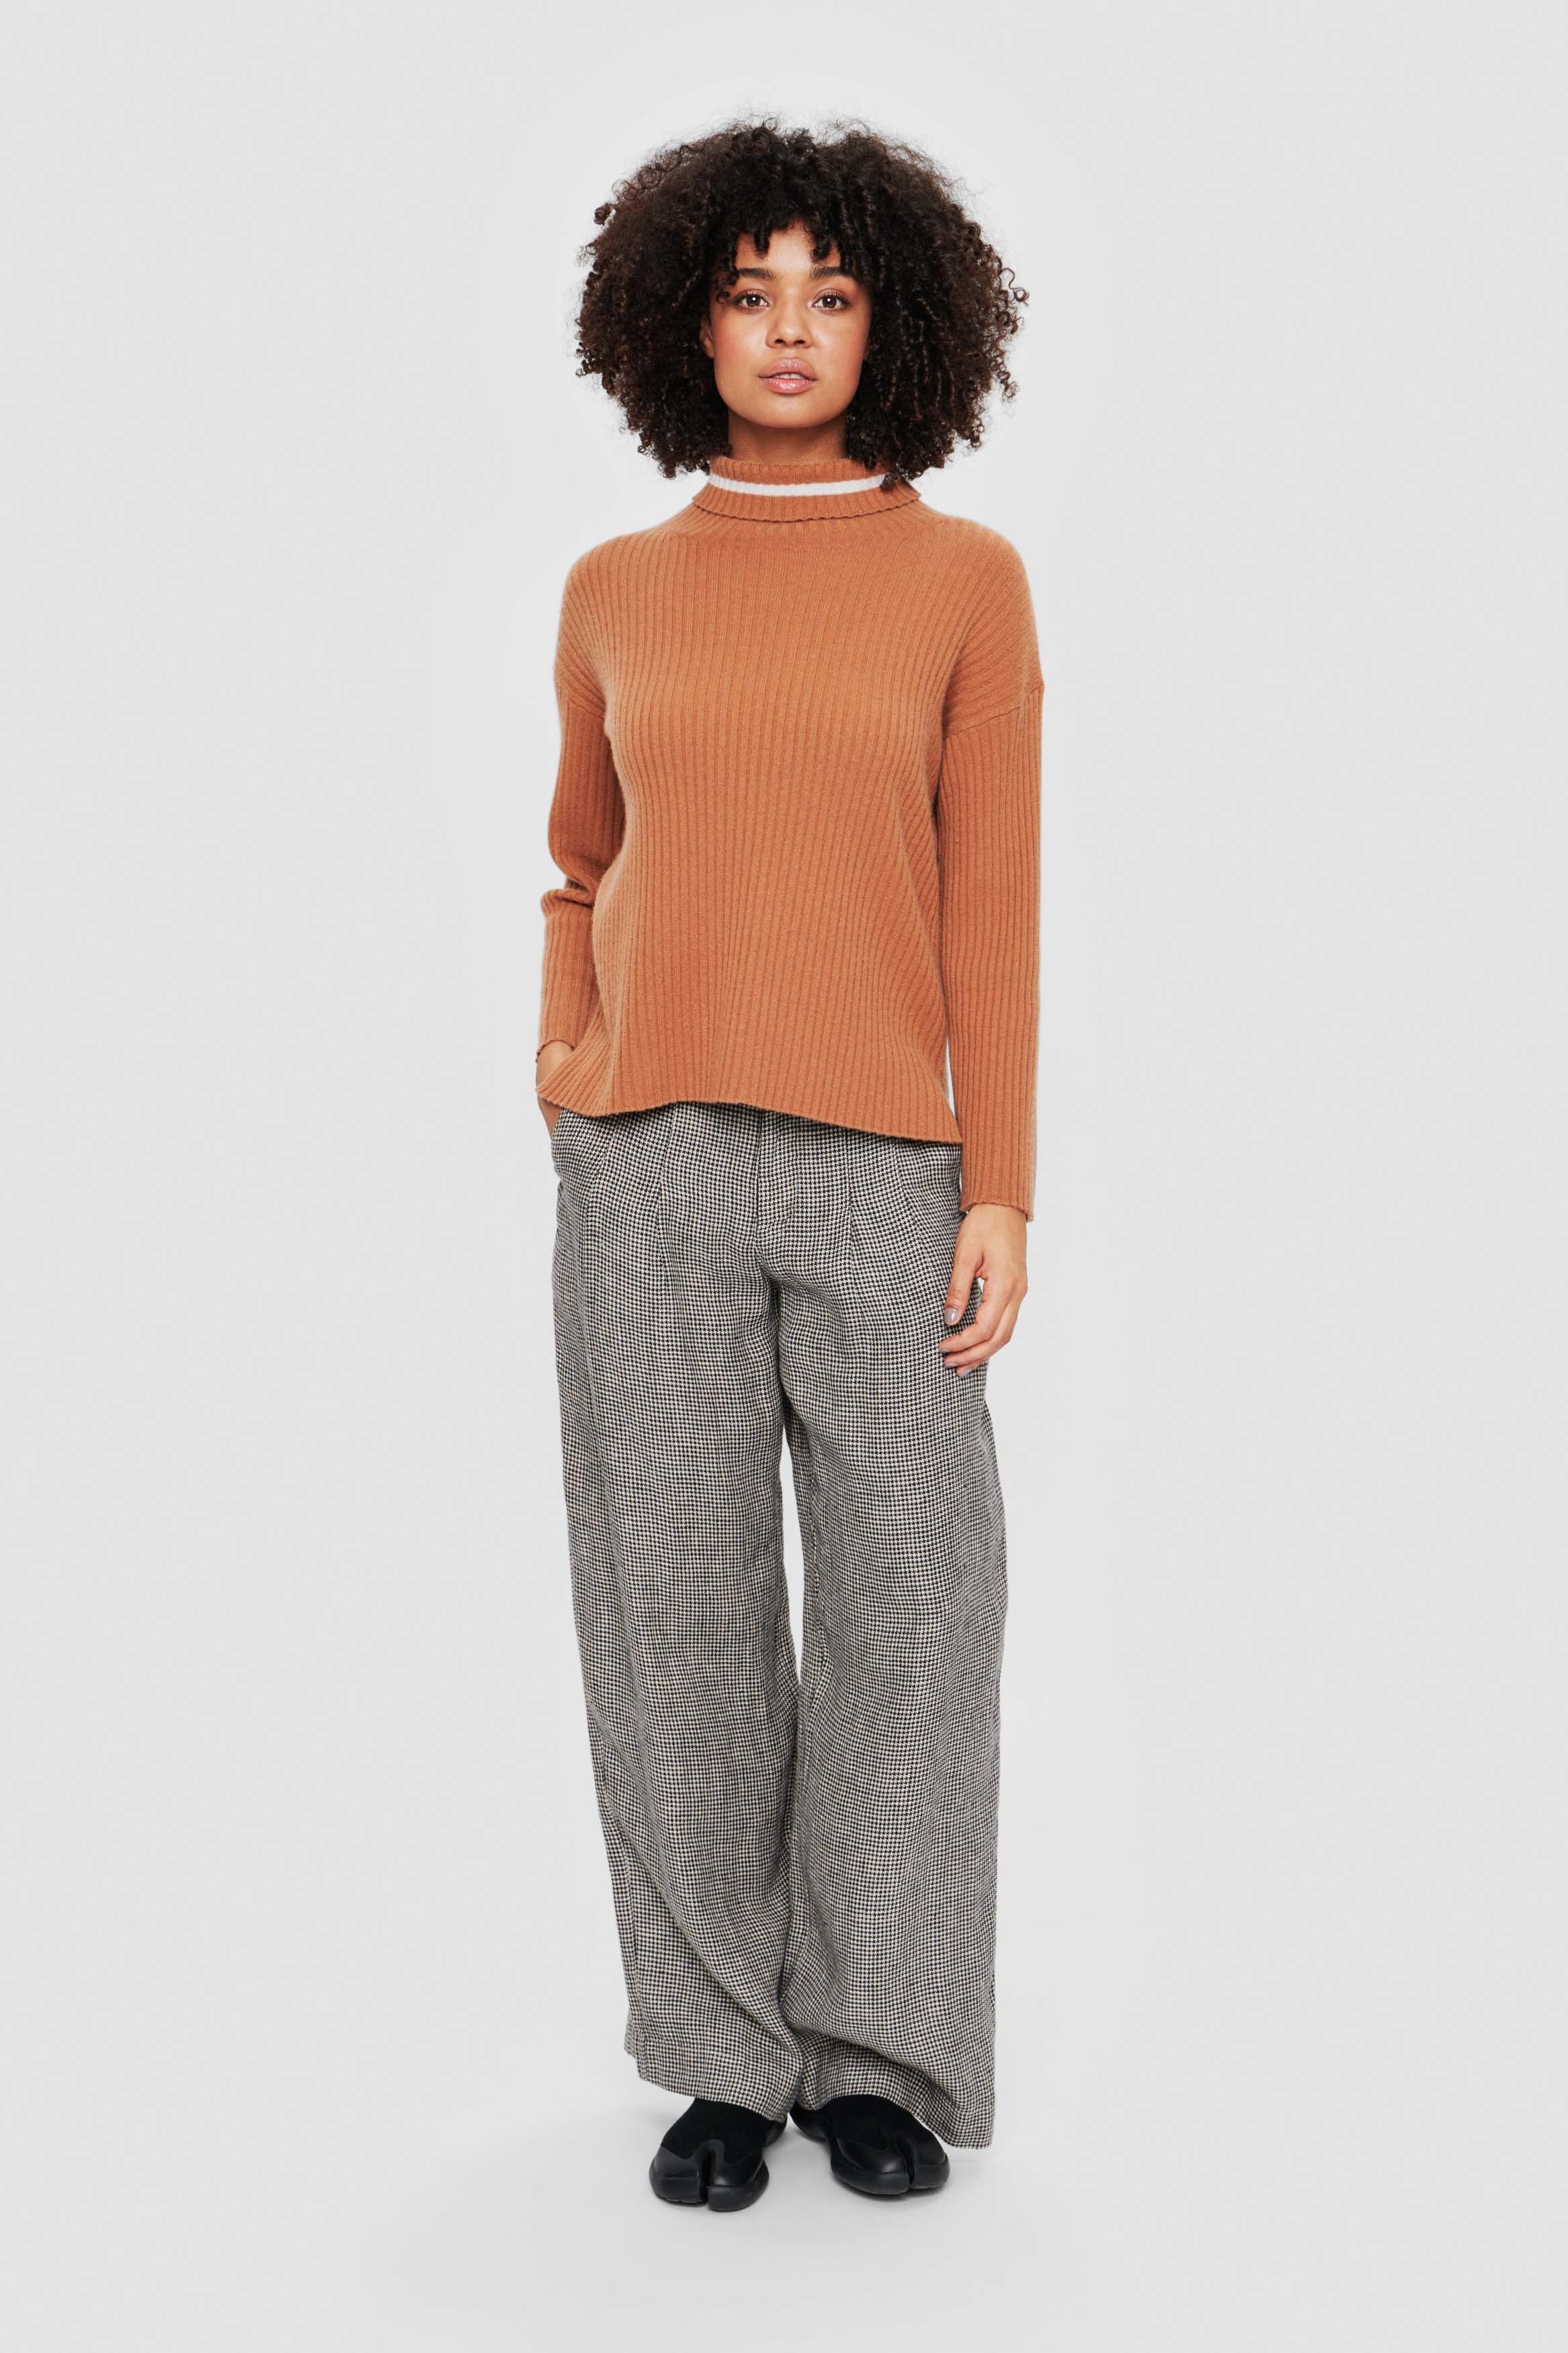 Pepita linen trousers with pleats